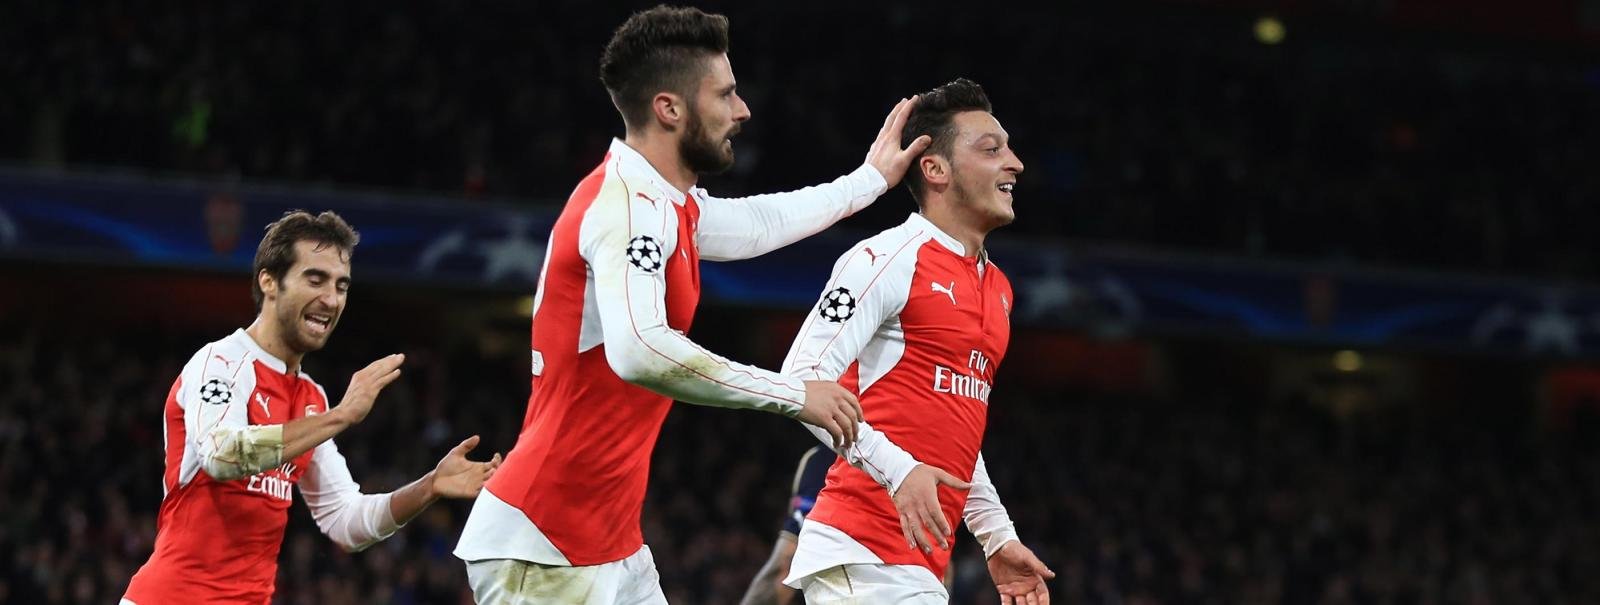 Champions League Round-up: Arsenal and Chelsea both win to keep chances alive